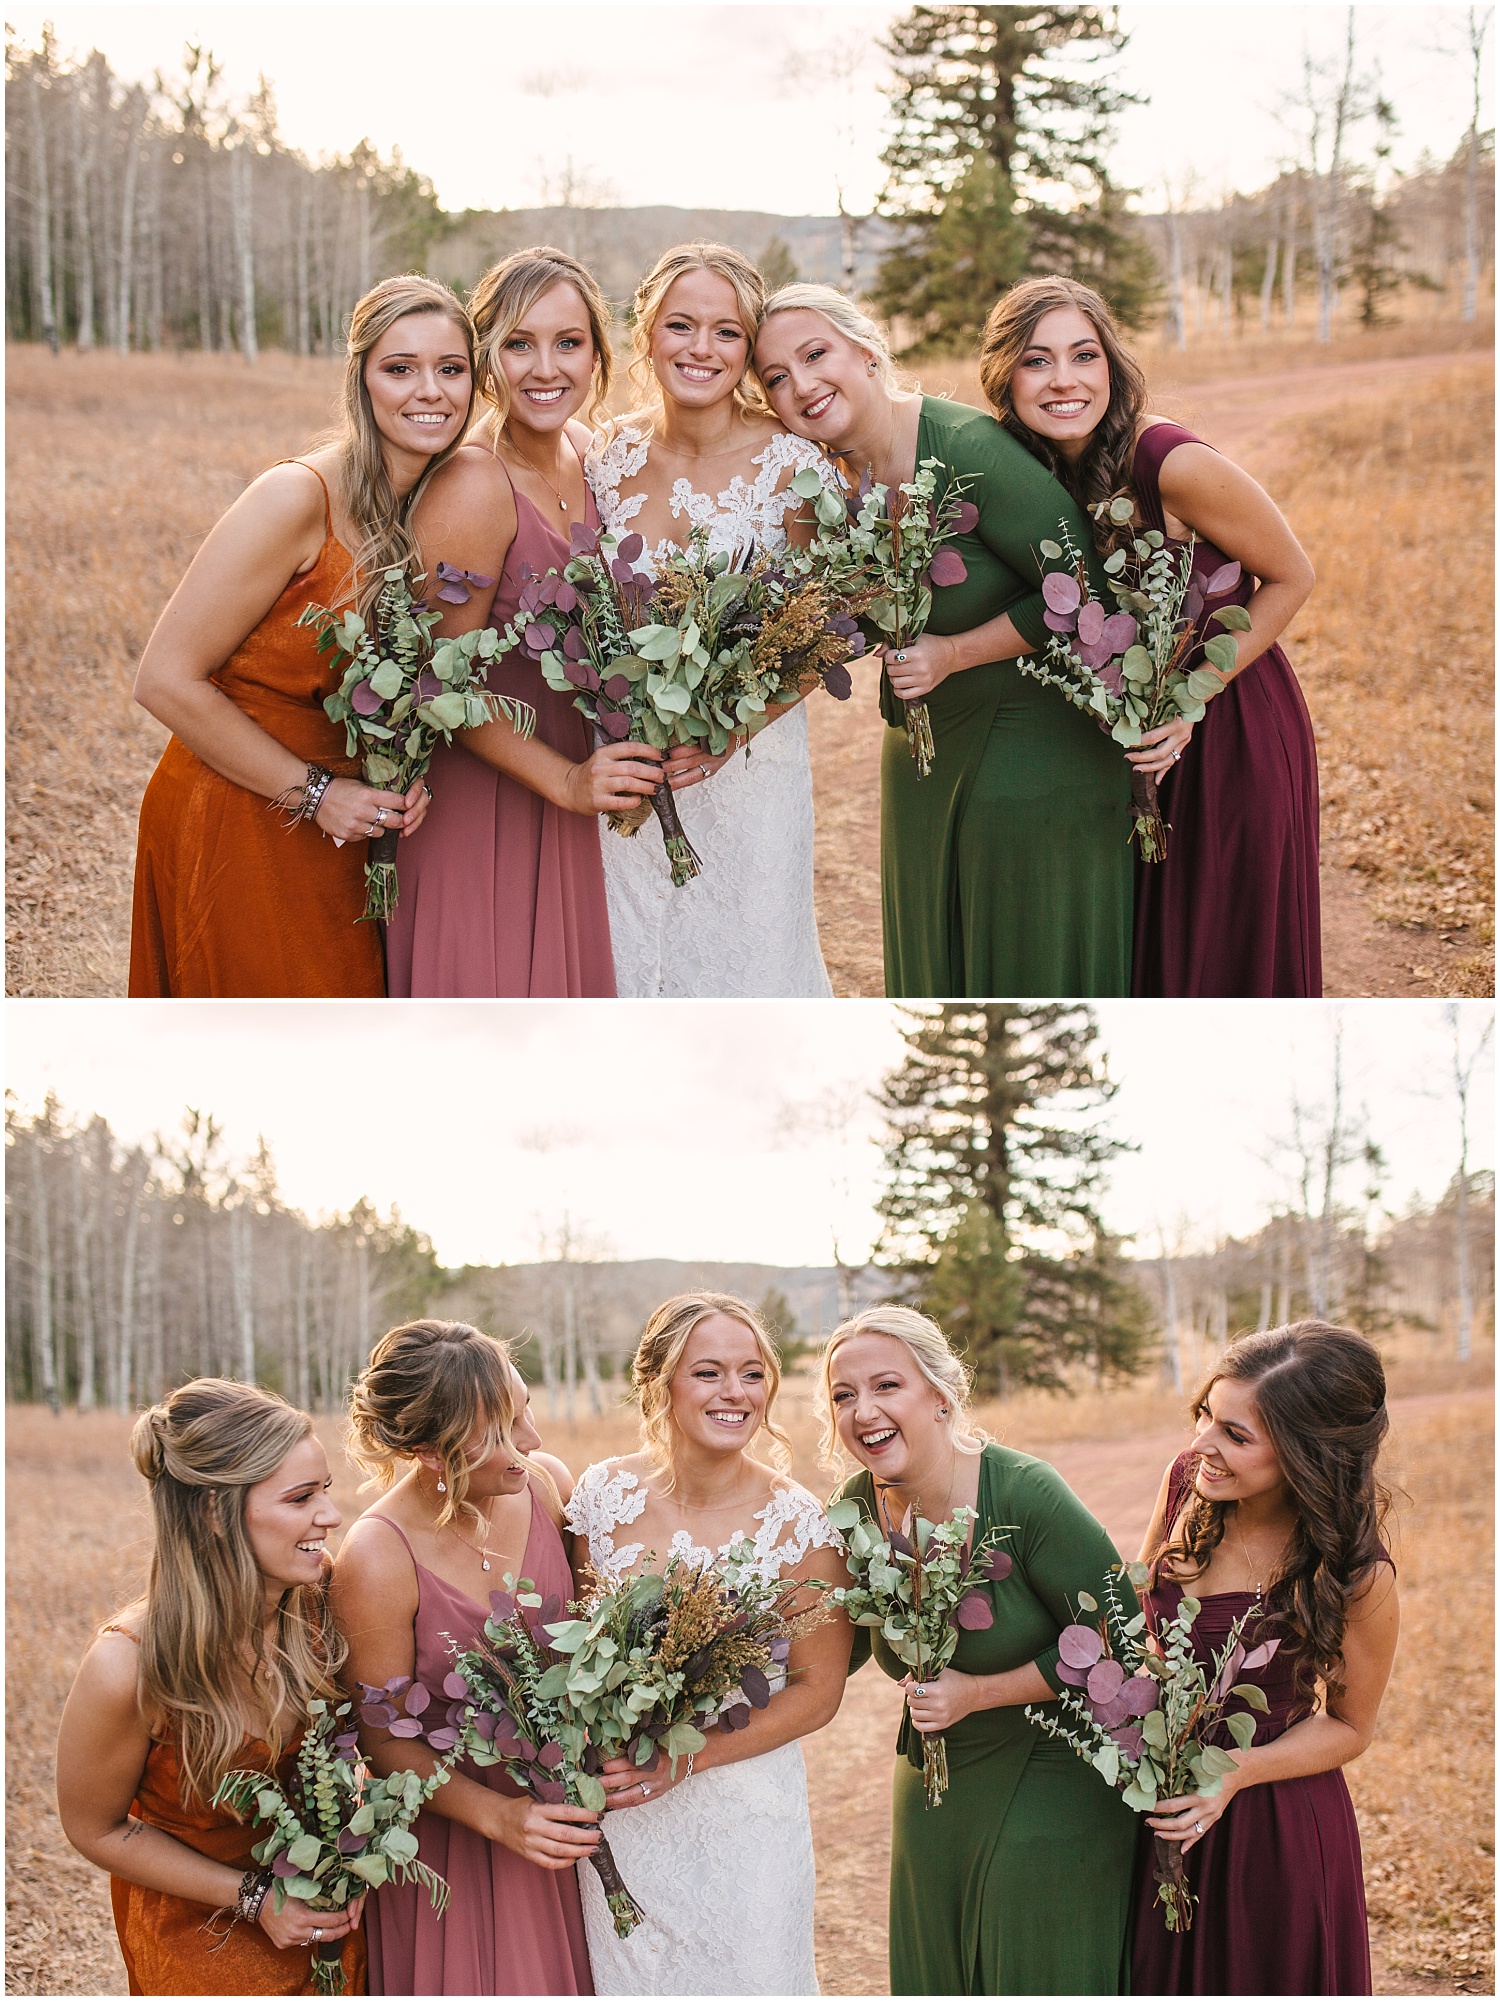 Bridesmaids in mismatched jewel toned dresses for early winter wedding in Woodland Park Colorado